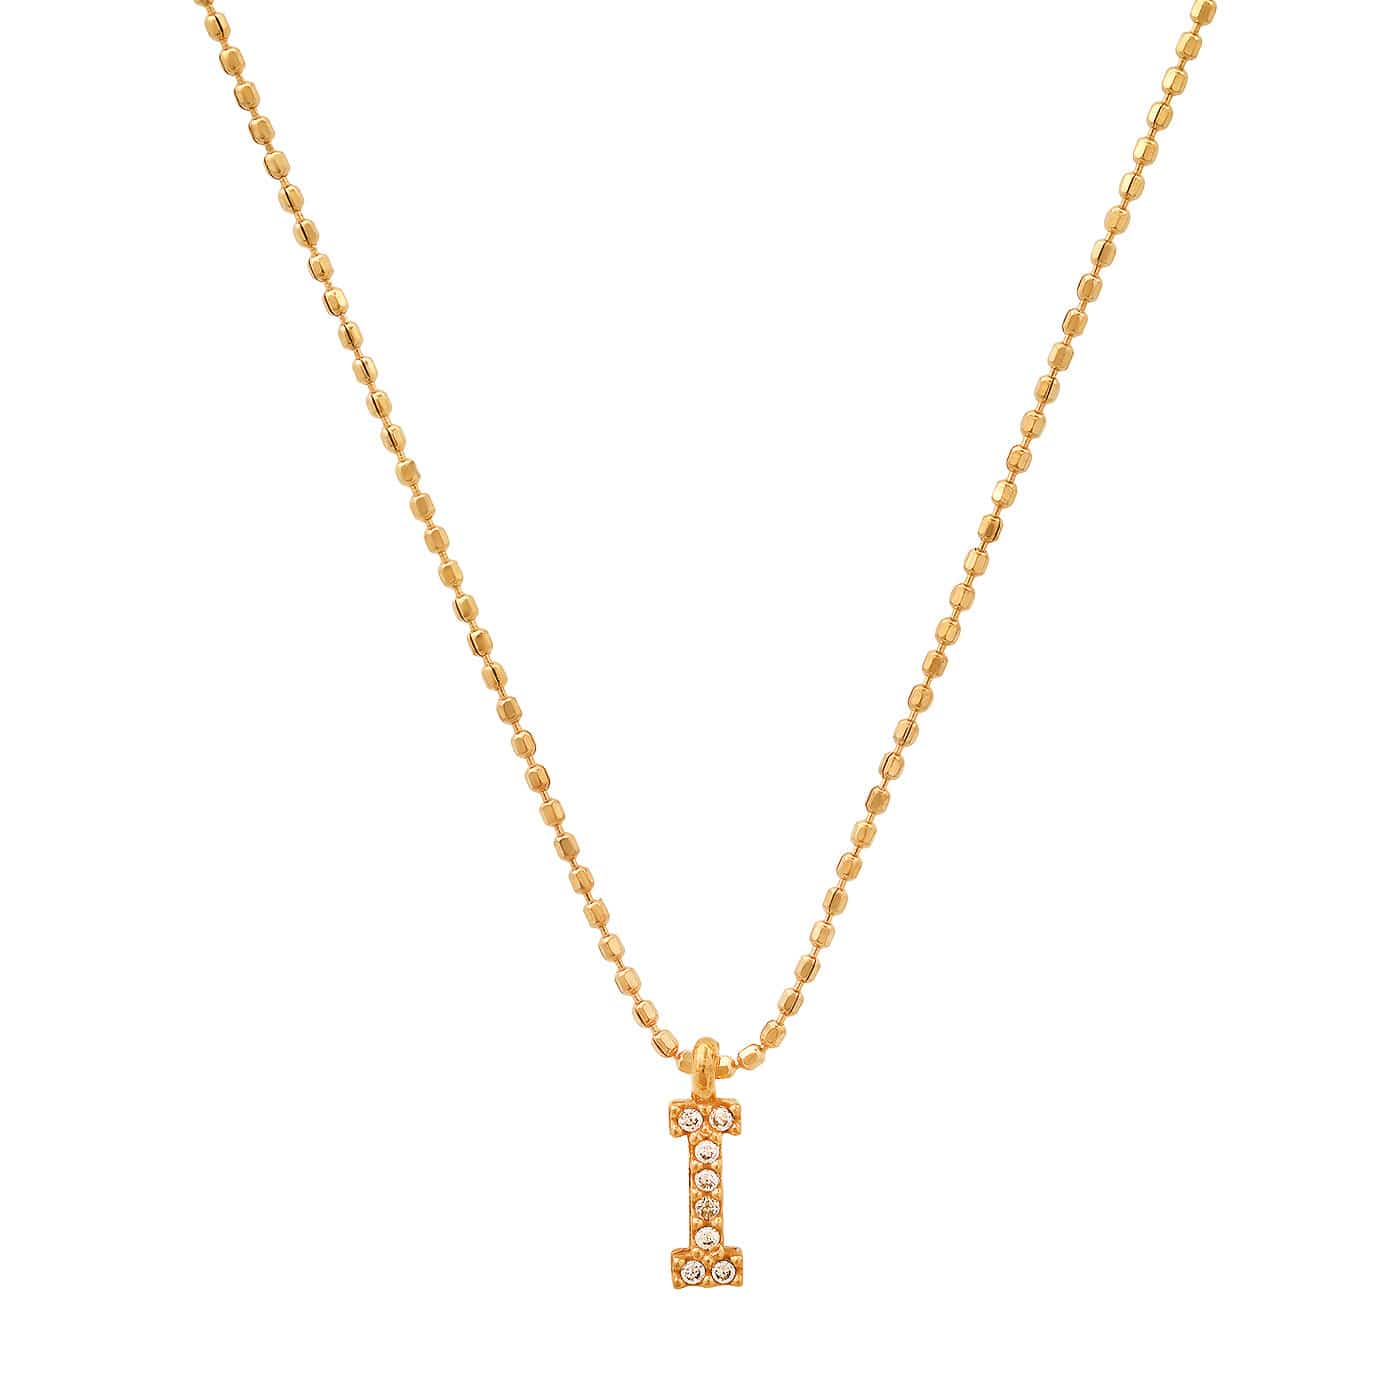 TAI JEWELRY Necklace I Pave Initial Ball Chain Necklace